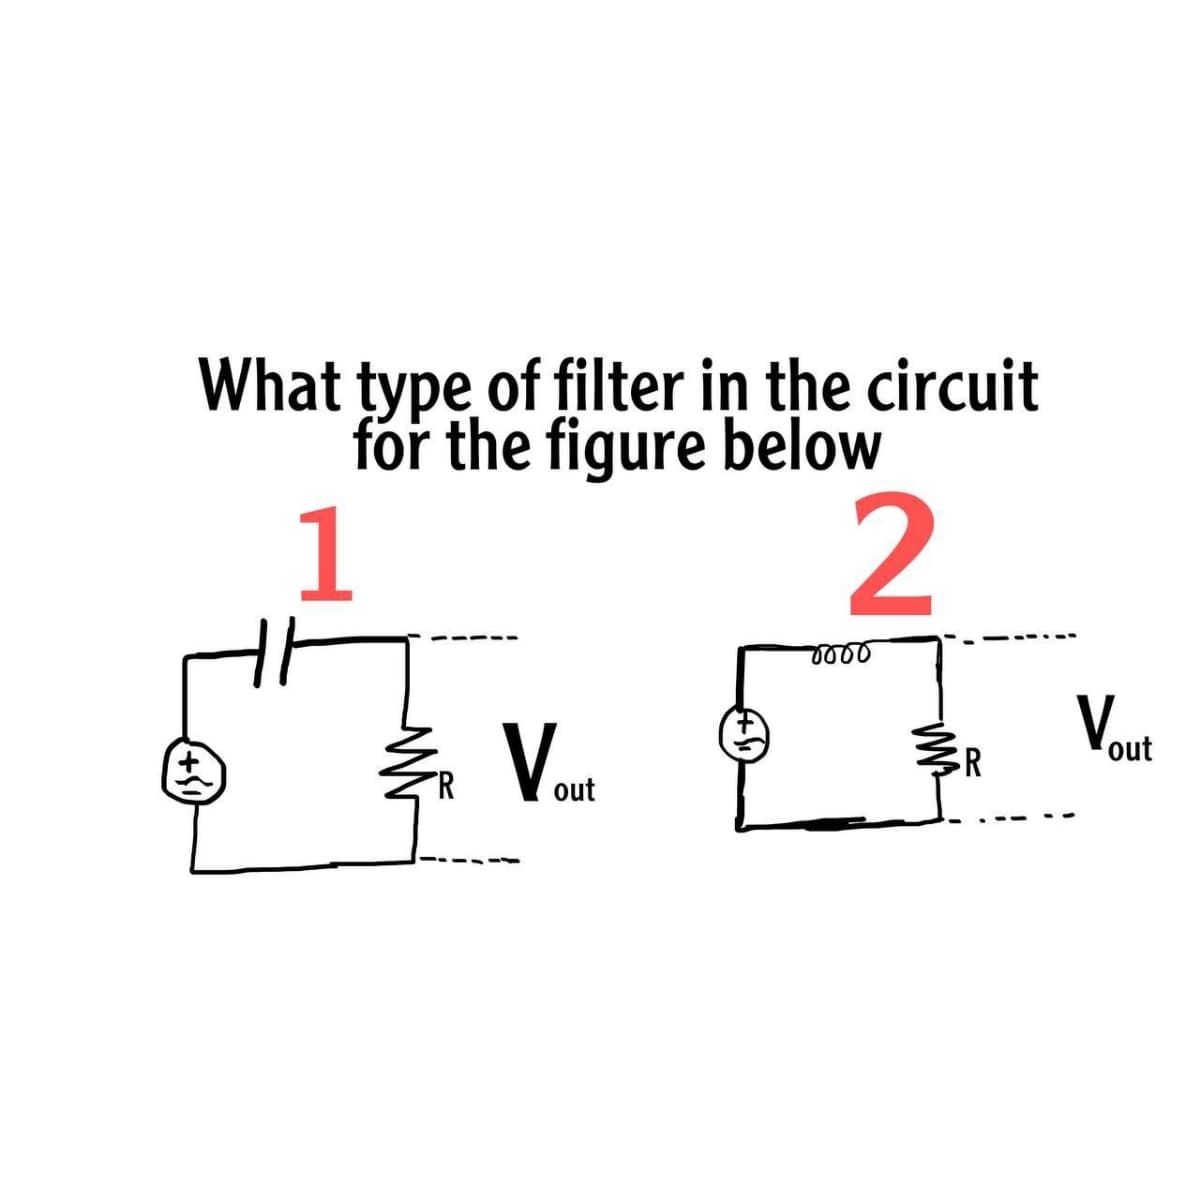 What type of filter in the circuit
fór the figure below
TR
ER
out
